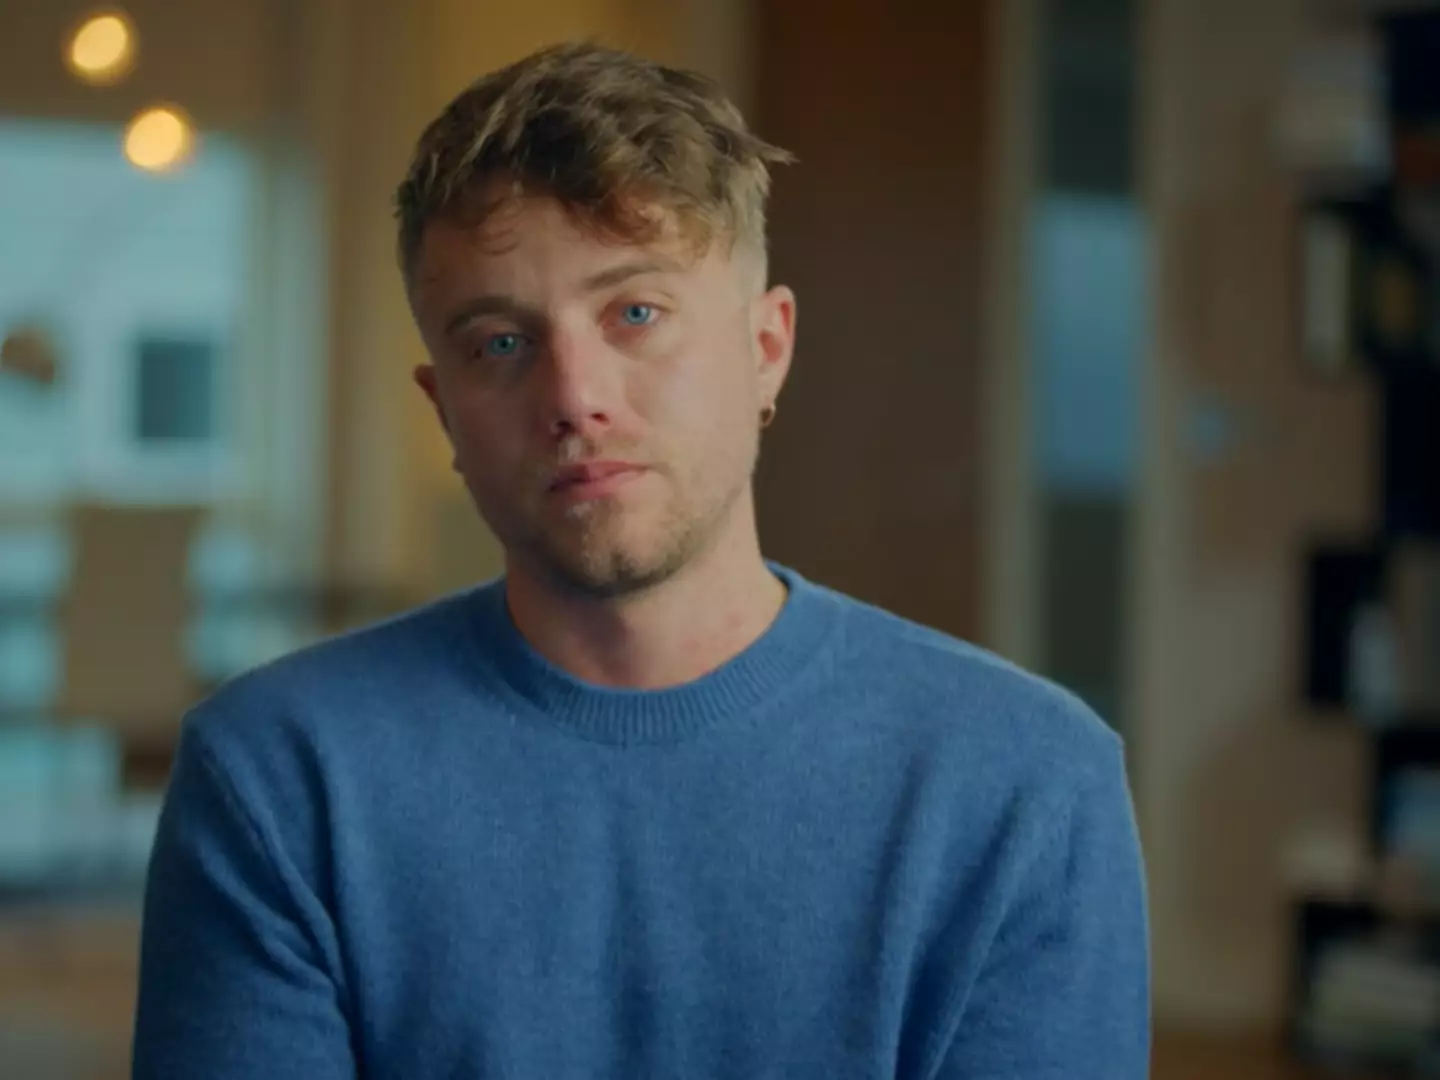 Roman Kemp presented a documentary on mental health awareness in 2021.